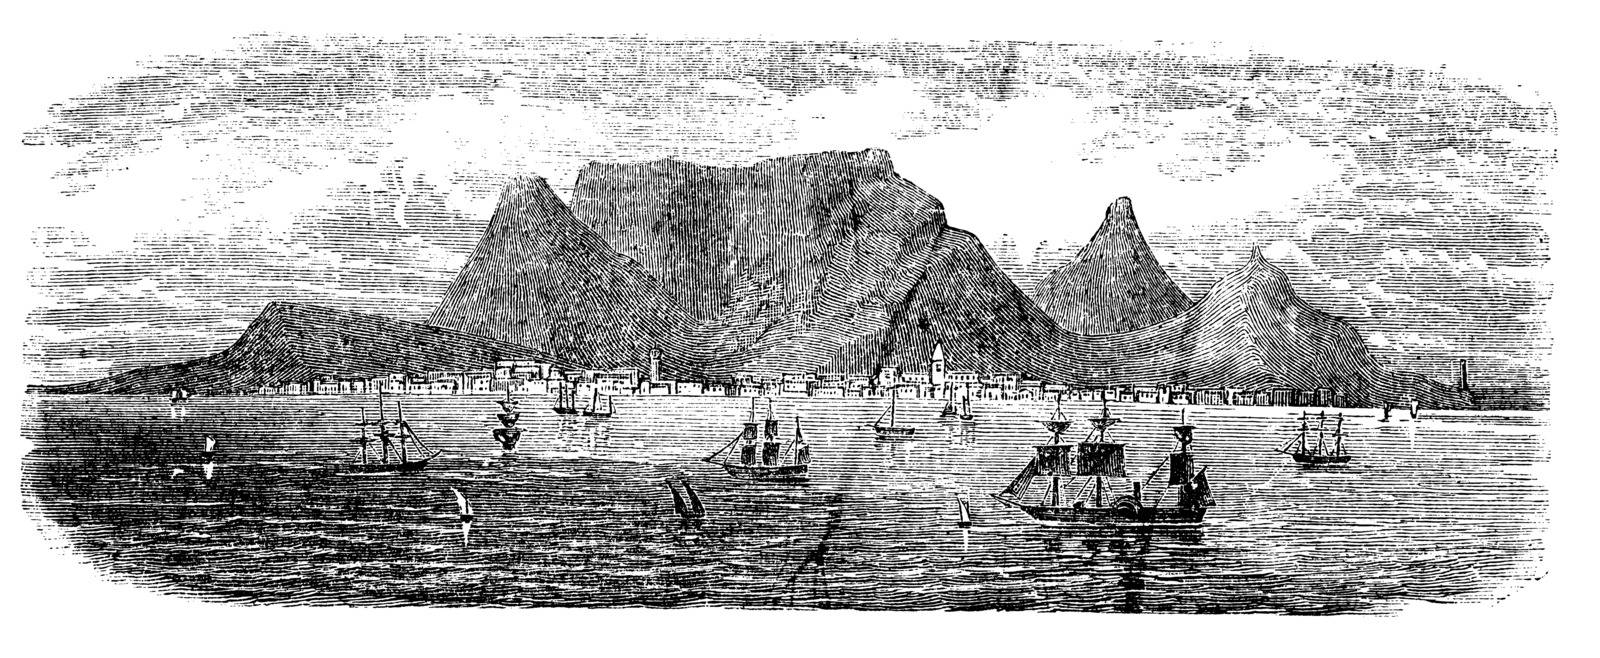 Scenic view from Table bay vintage, Cape Town, South Africa vintage engraving. Old engraved illustration view of Table Mountains near Cape town with ships, 1890s.